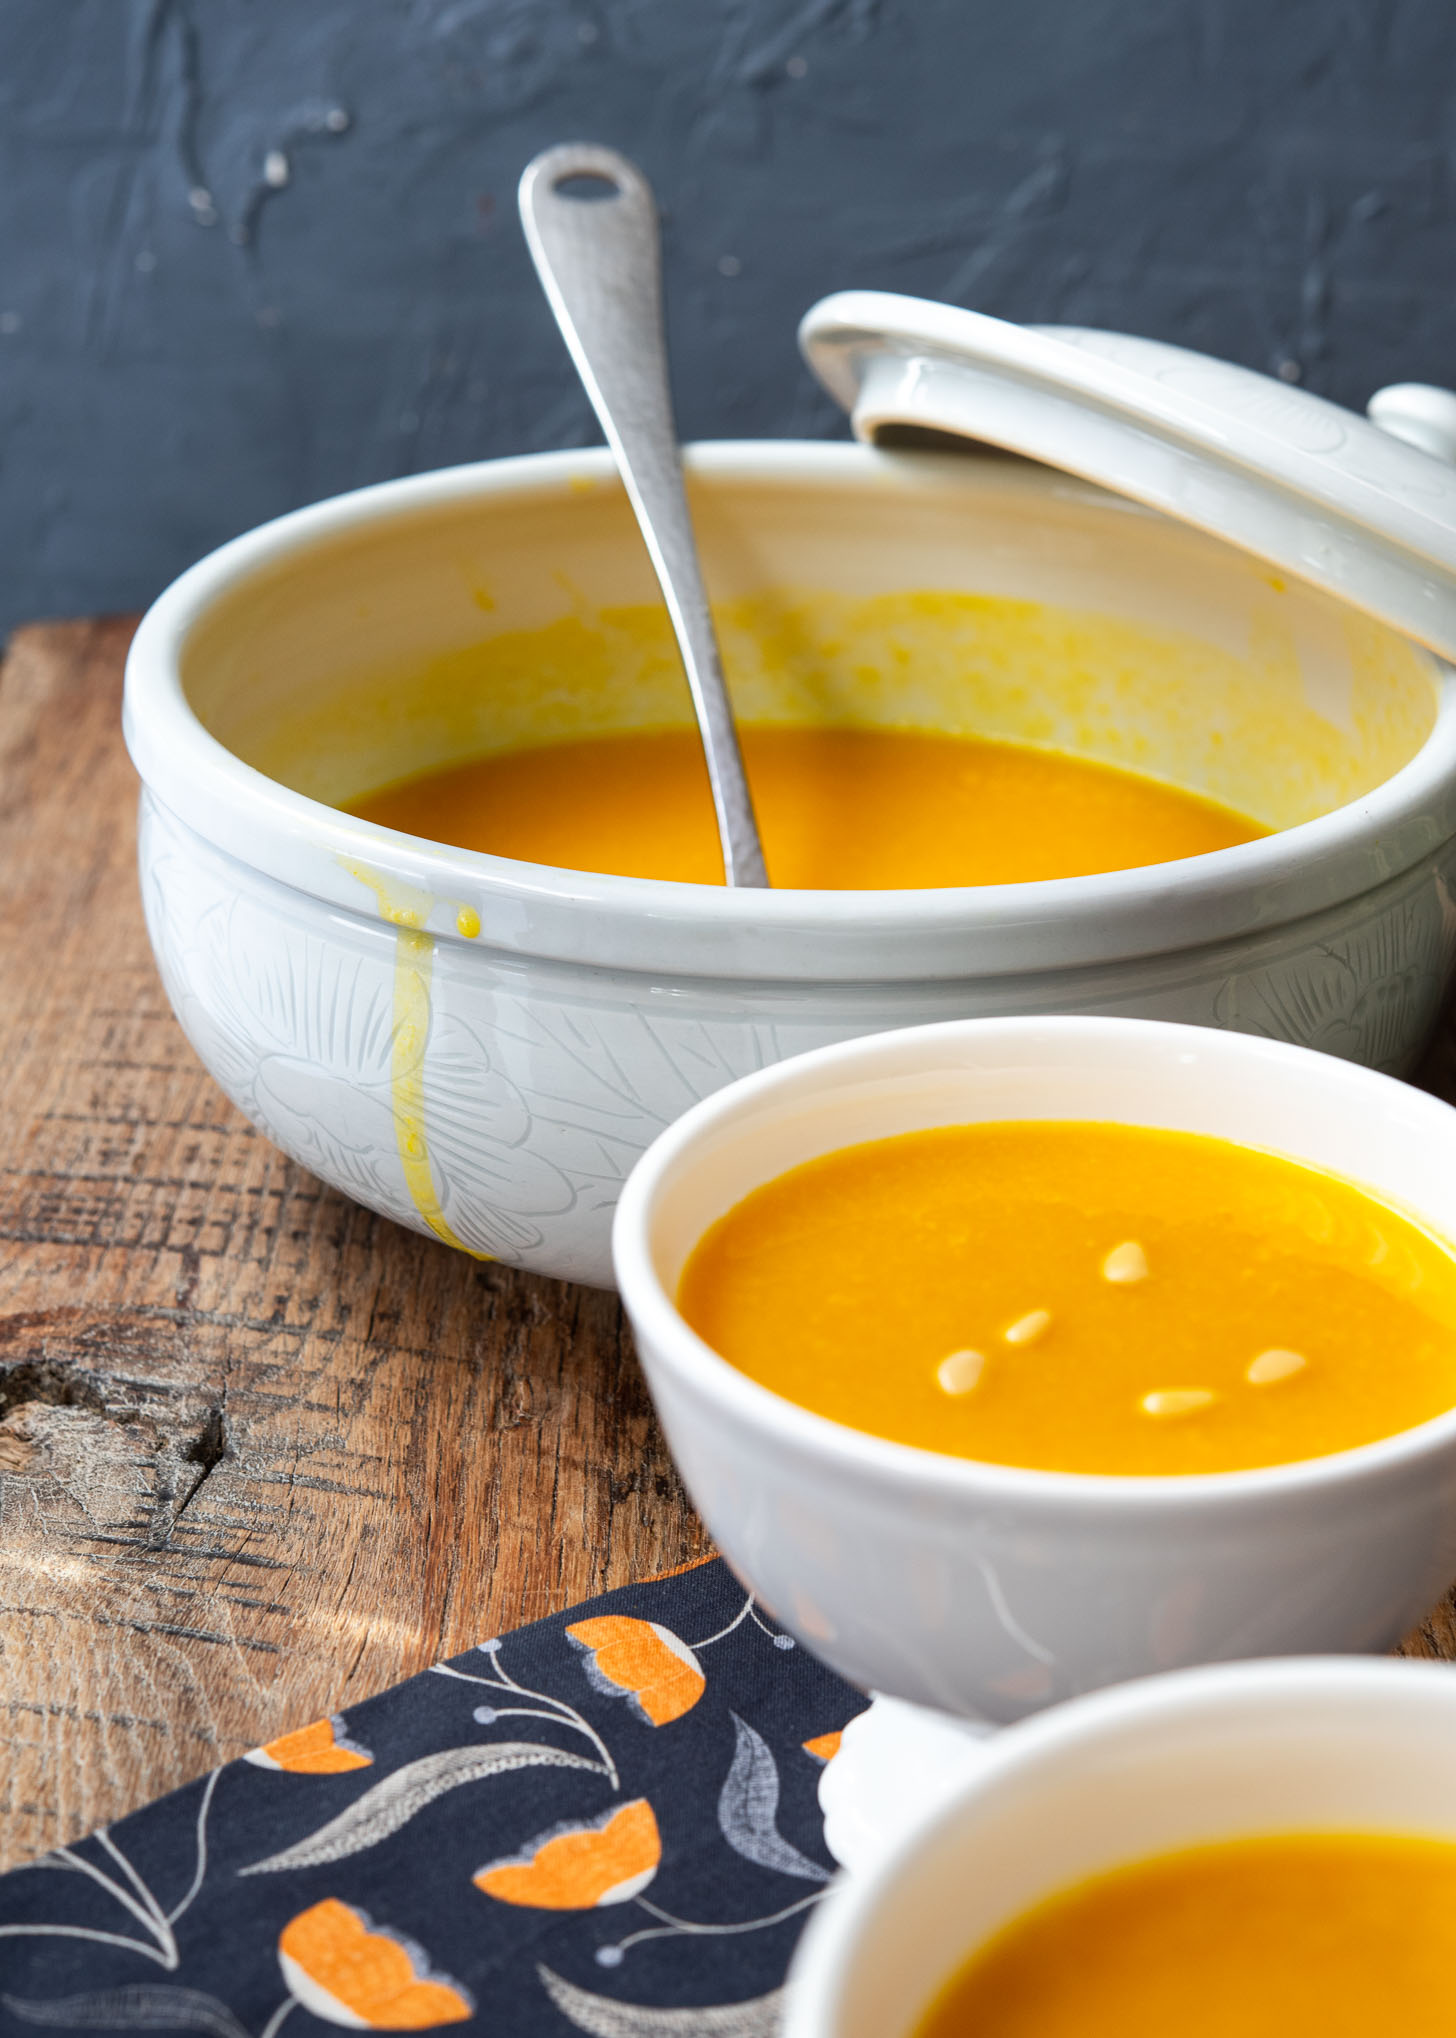 A large soup bowl and serving bowls are filled with Korean pumpkin porridge.